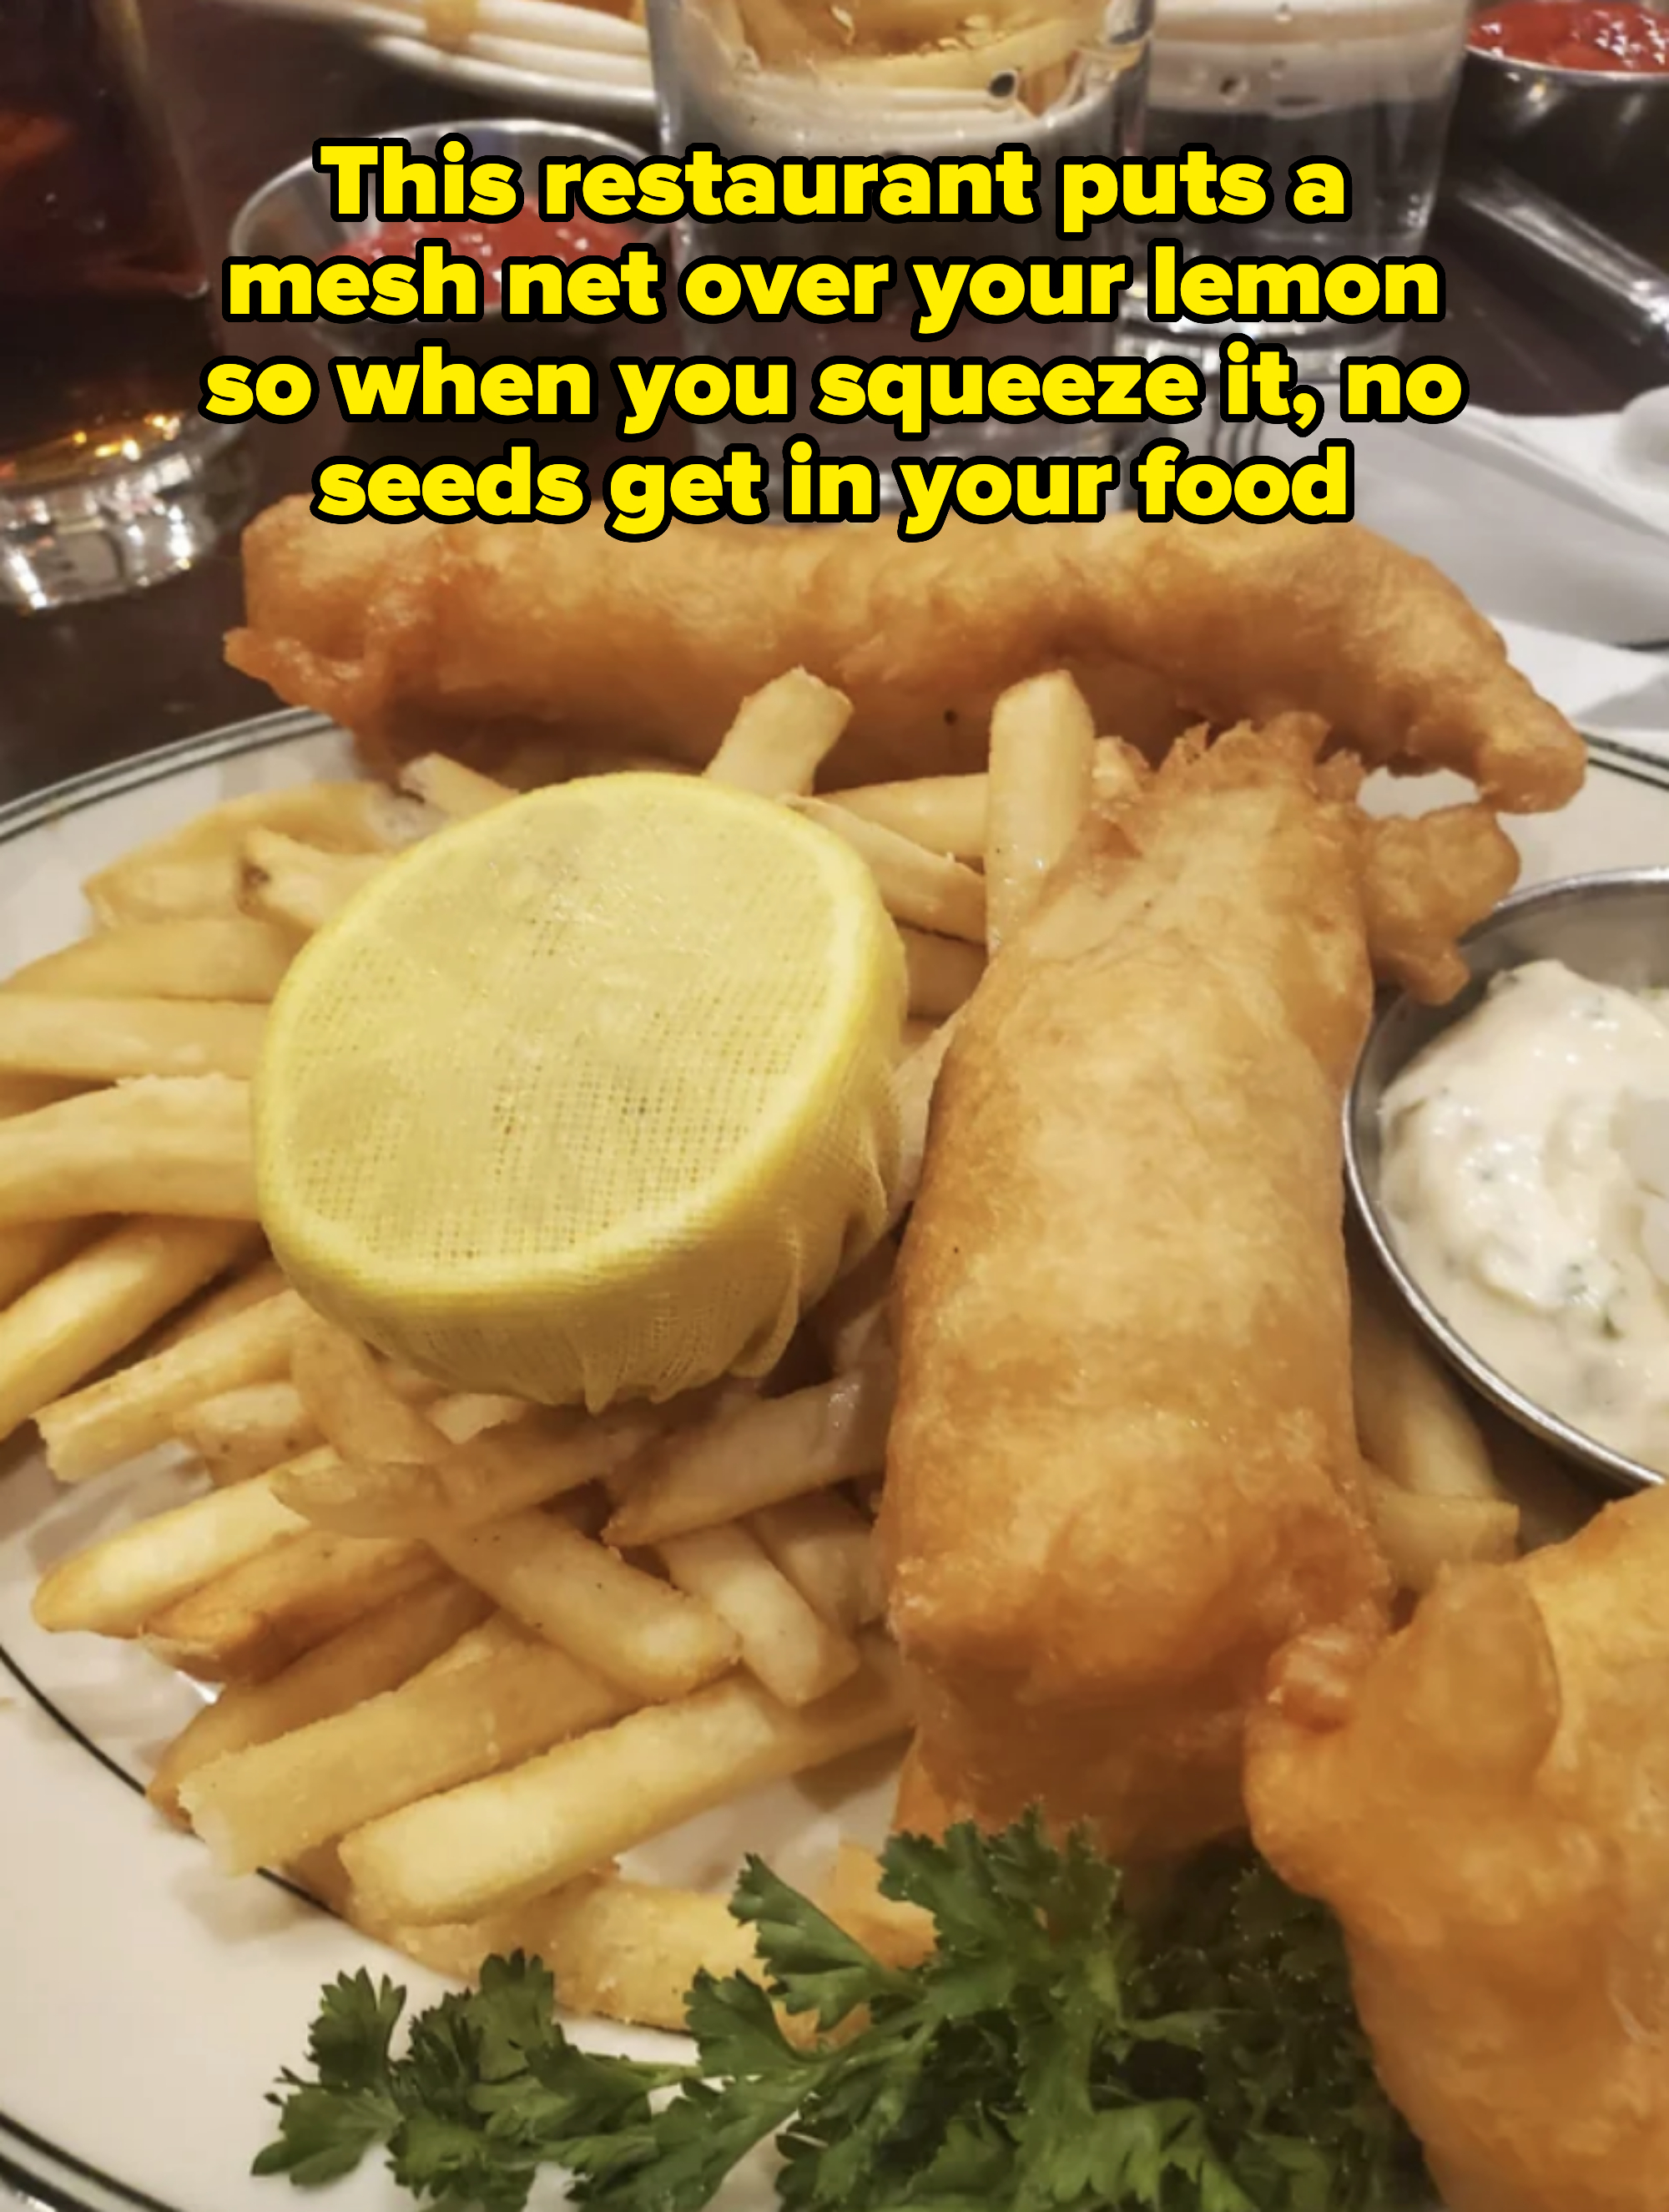 Plate with two pieces of fried fish and chips, garnished with parsley and lemon. Tartar sauce on the side